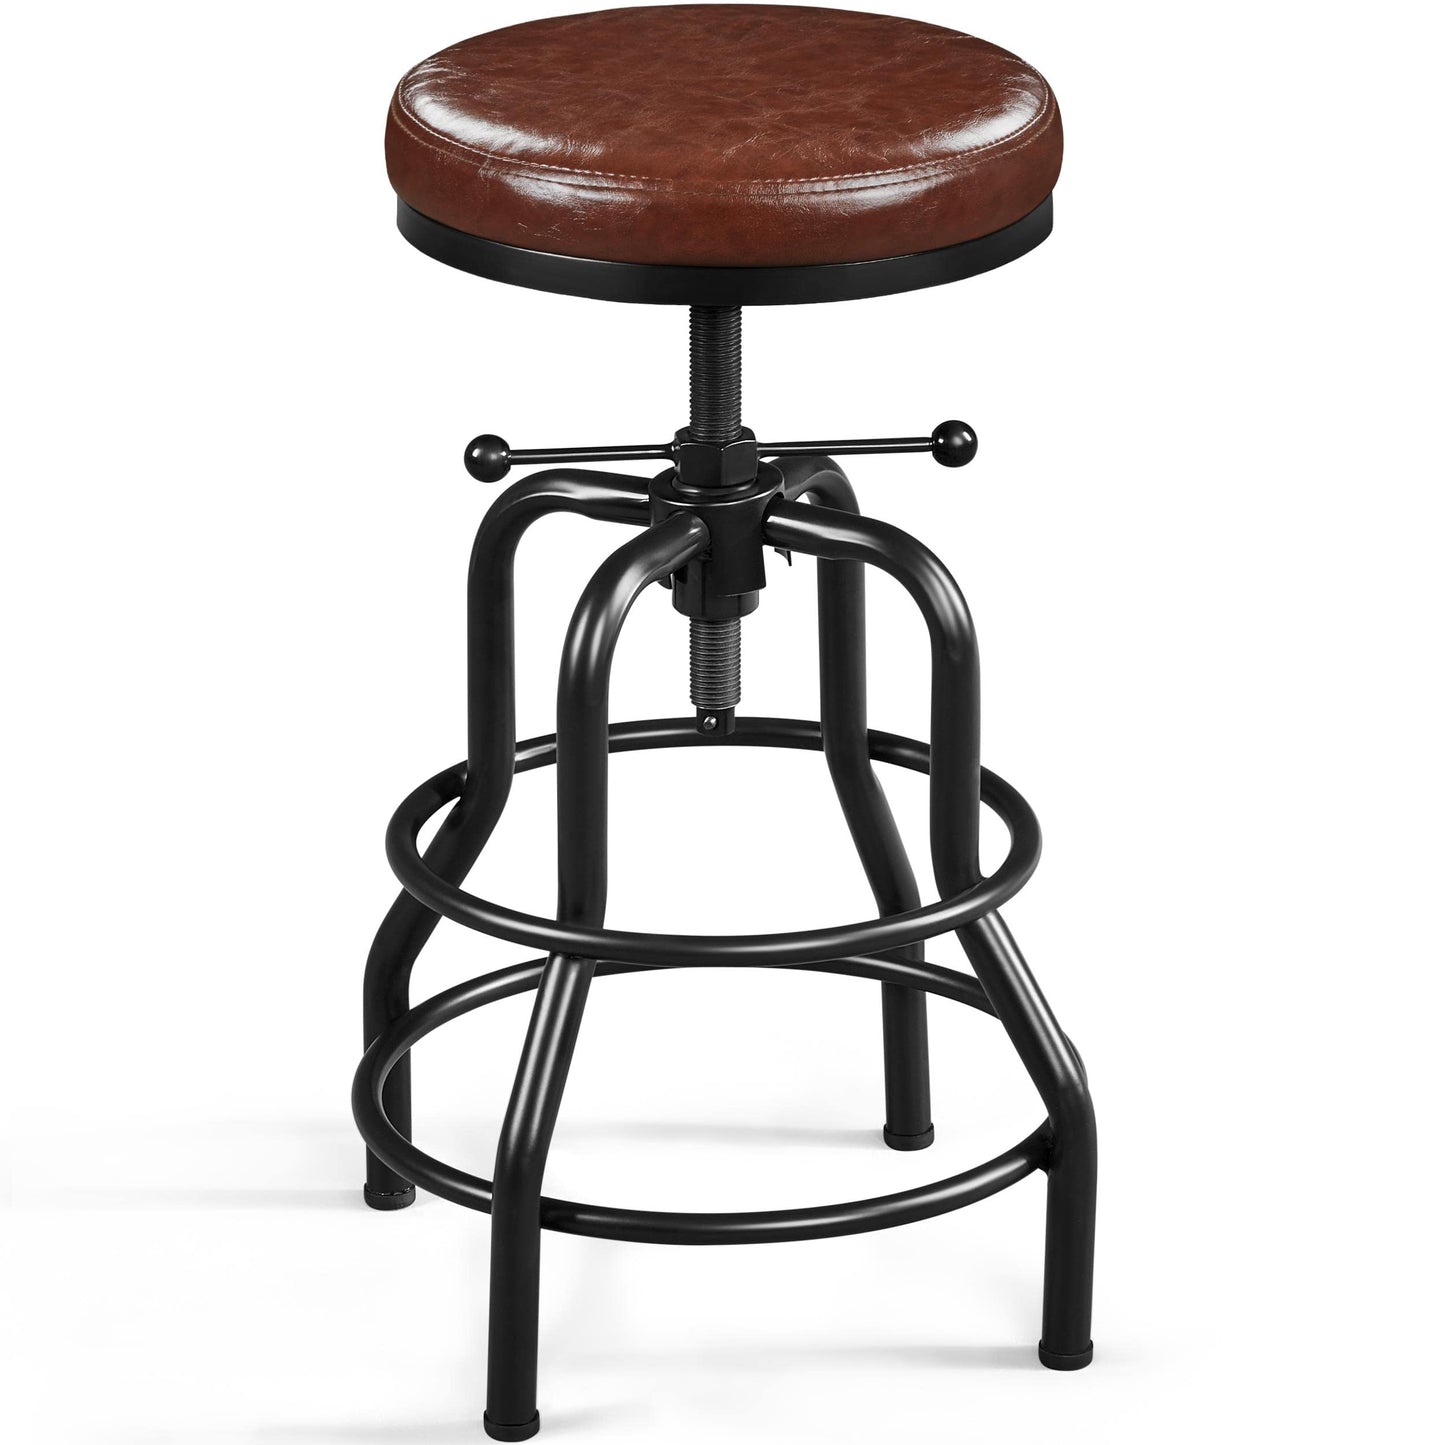 Yaheetech Industrial Bar Stool Vintage Counter Height Stool with Round Faux Leather Seat Metal Stool Adjustable Kitchen Stool 21.5-28 Inch Tall